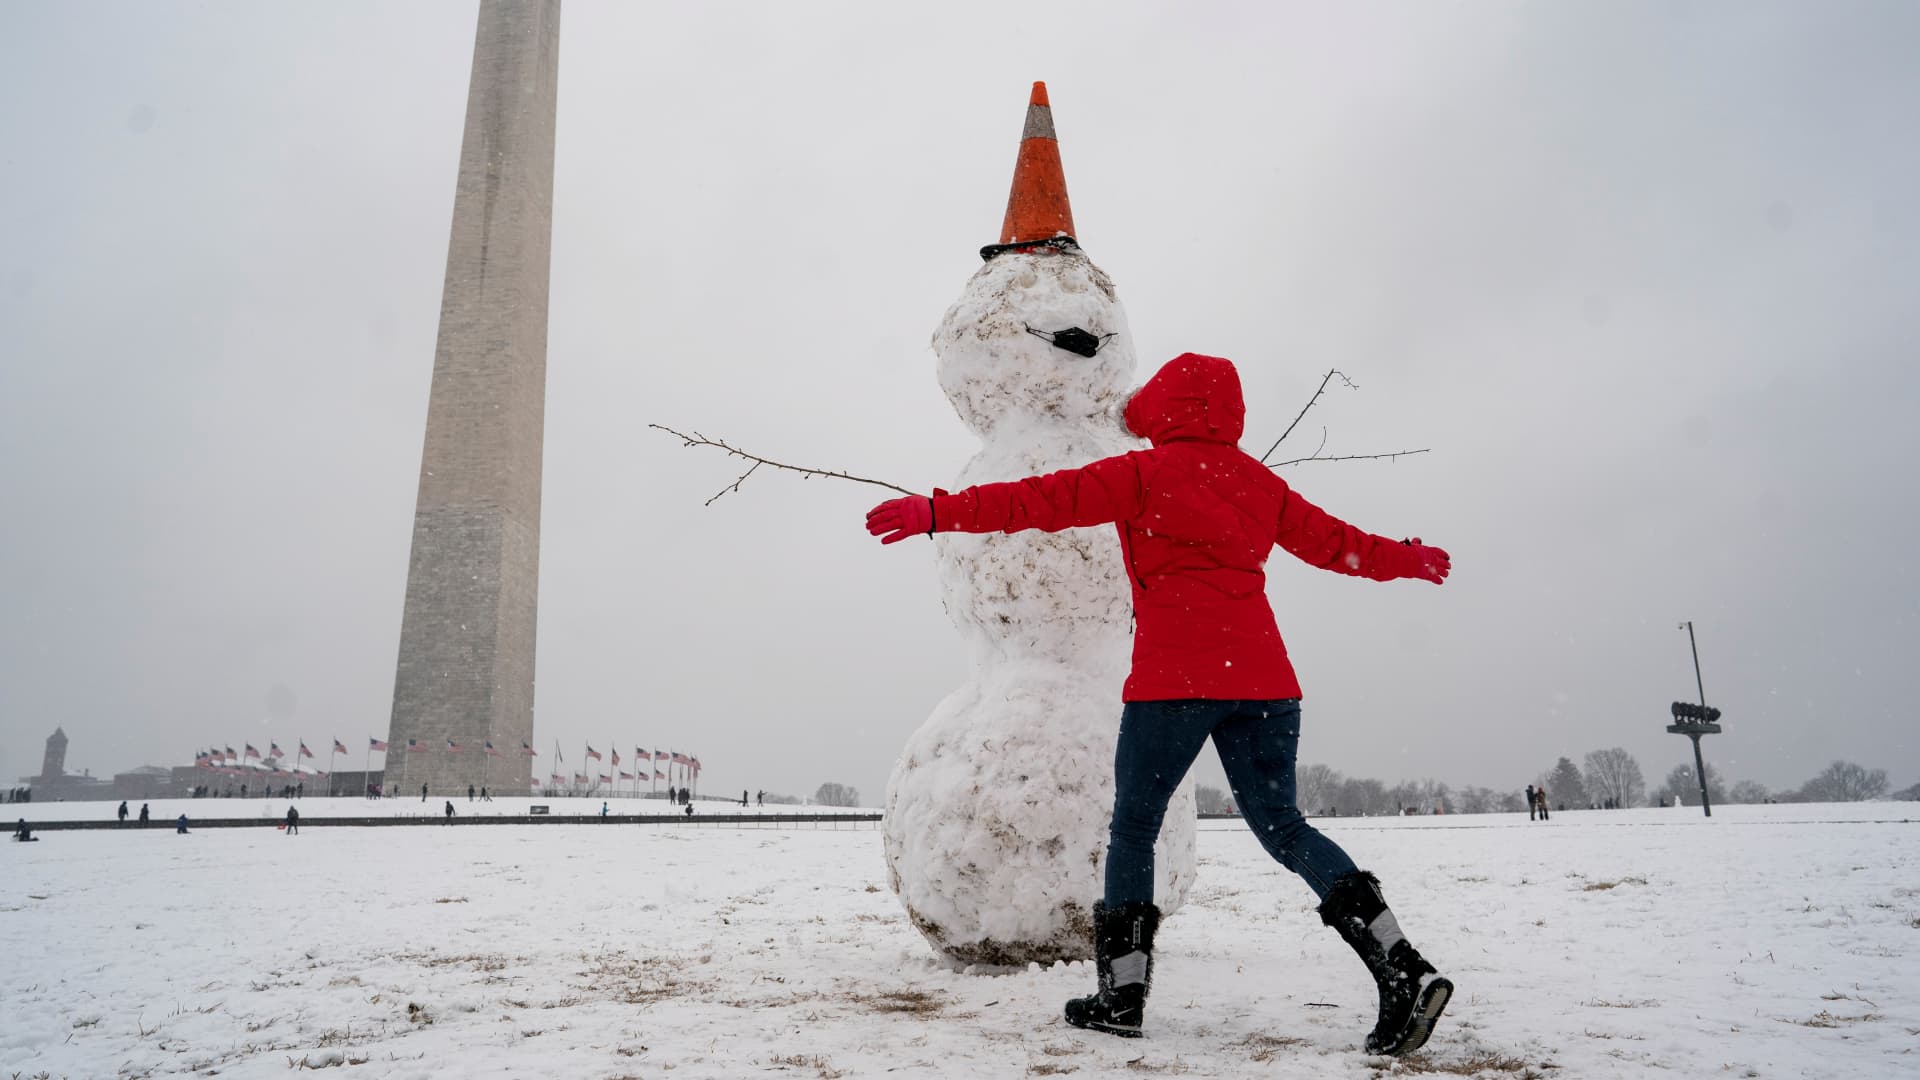 People play in the snow at the National Mall near the Washington Monument in Washington D.C., Jan. 31, 2021.